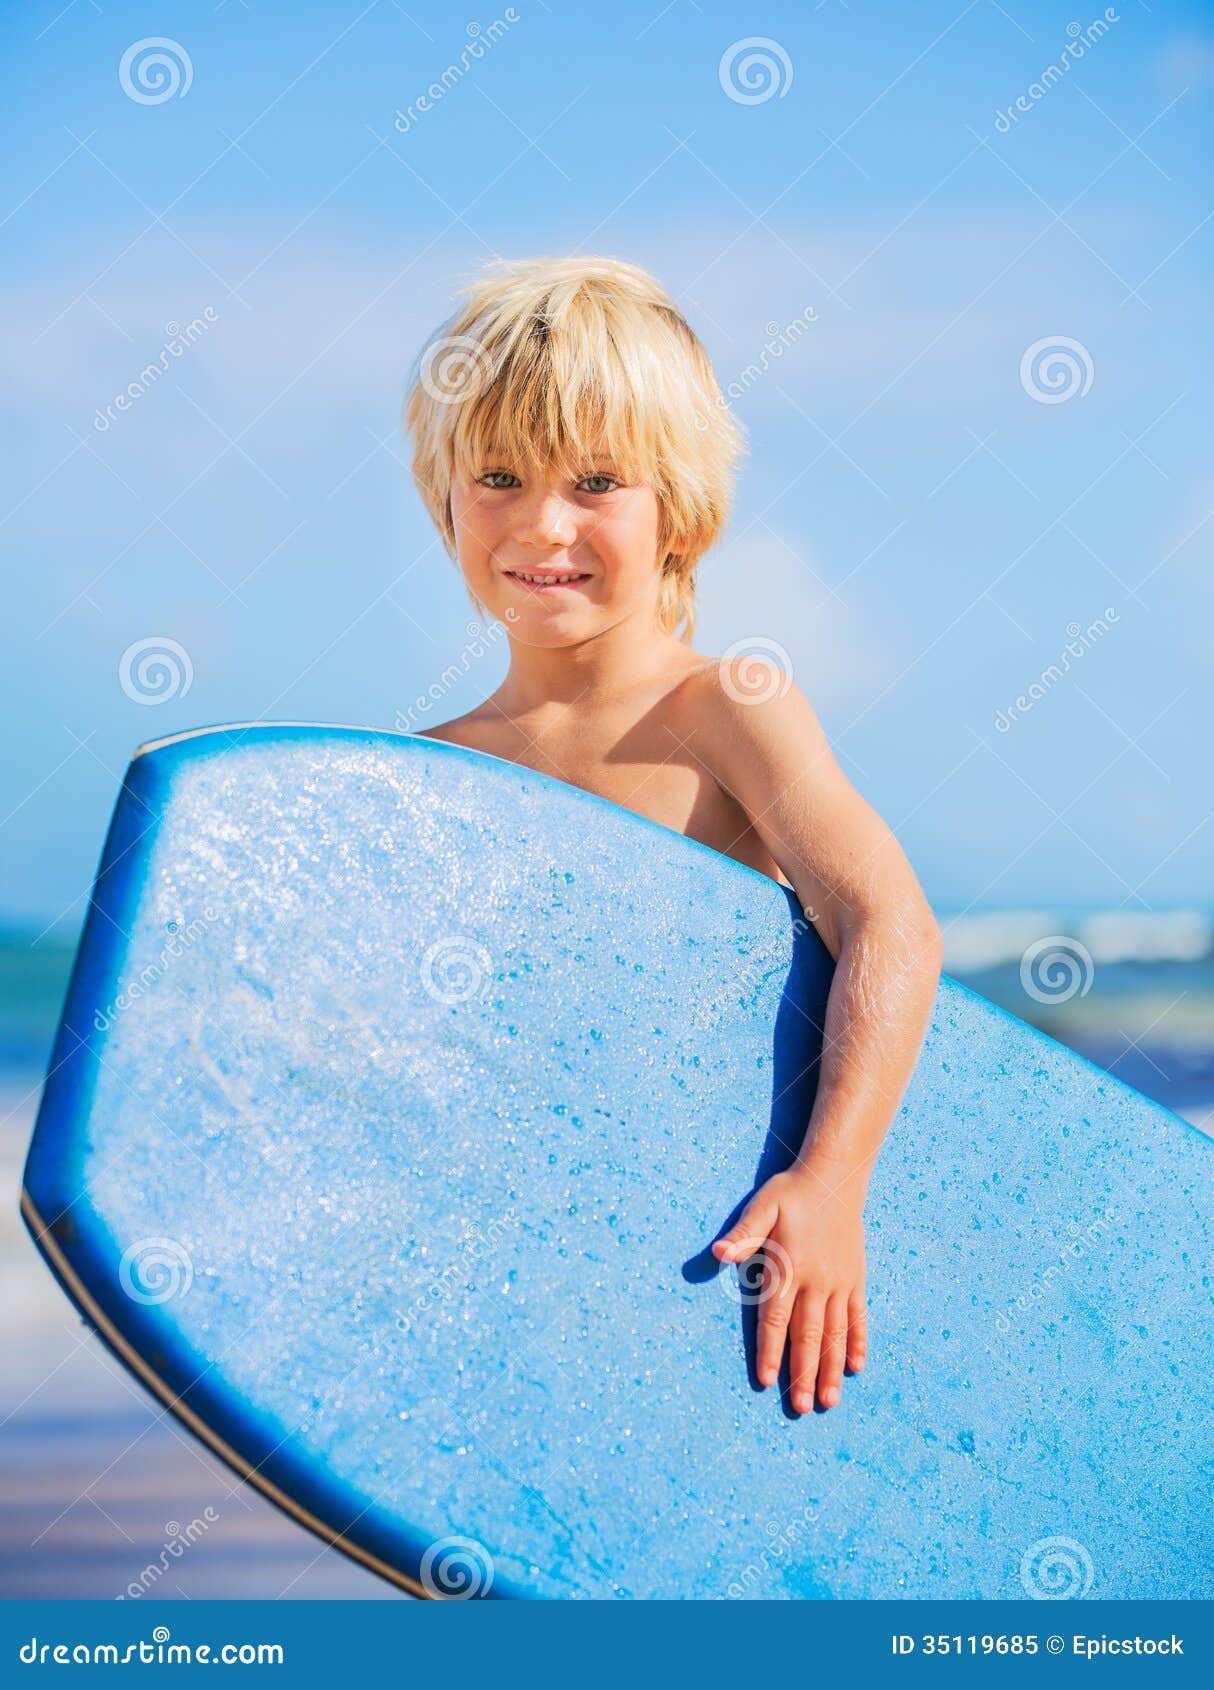 Happy Young Boy Having Fun at the Beach on Vacation, Stock Image ...